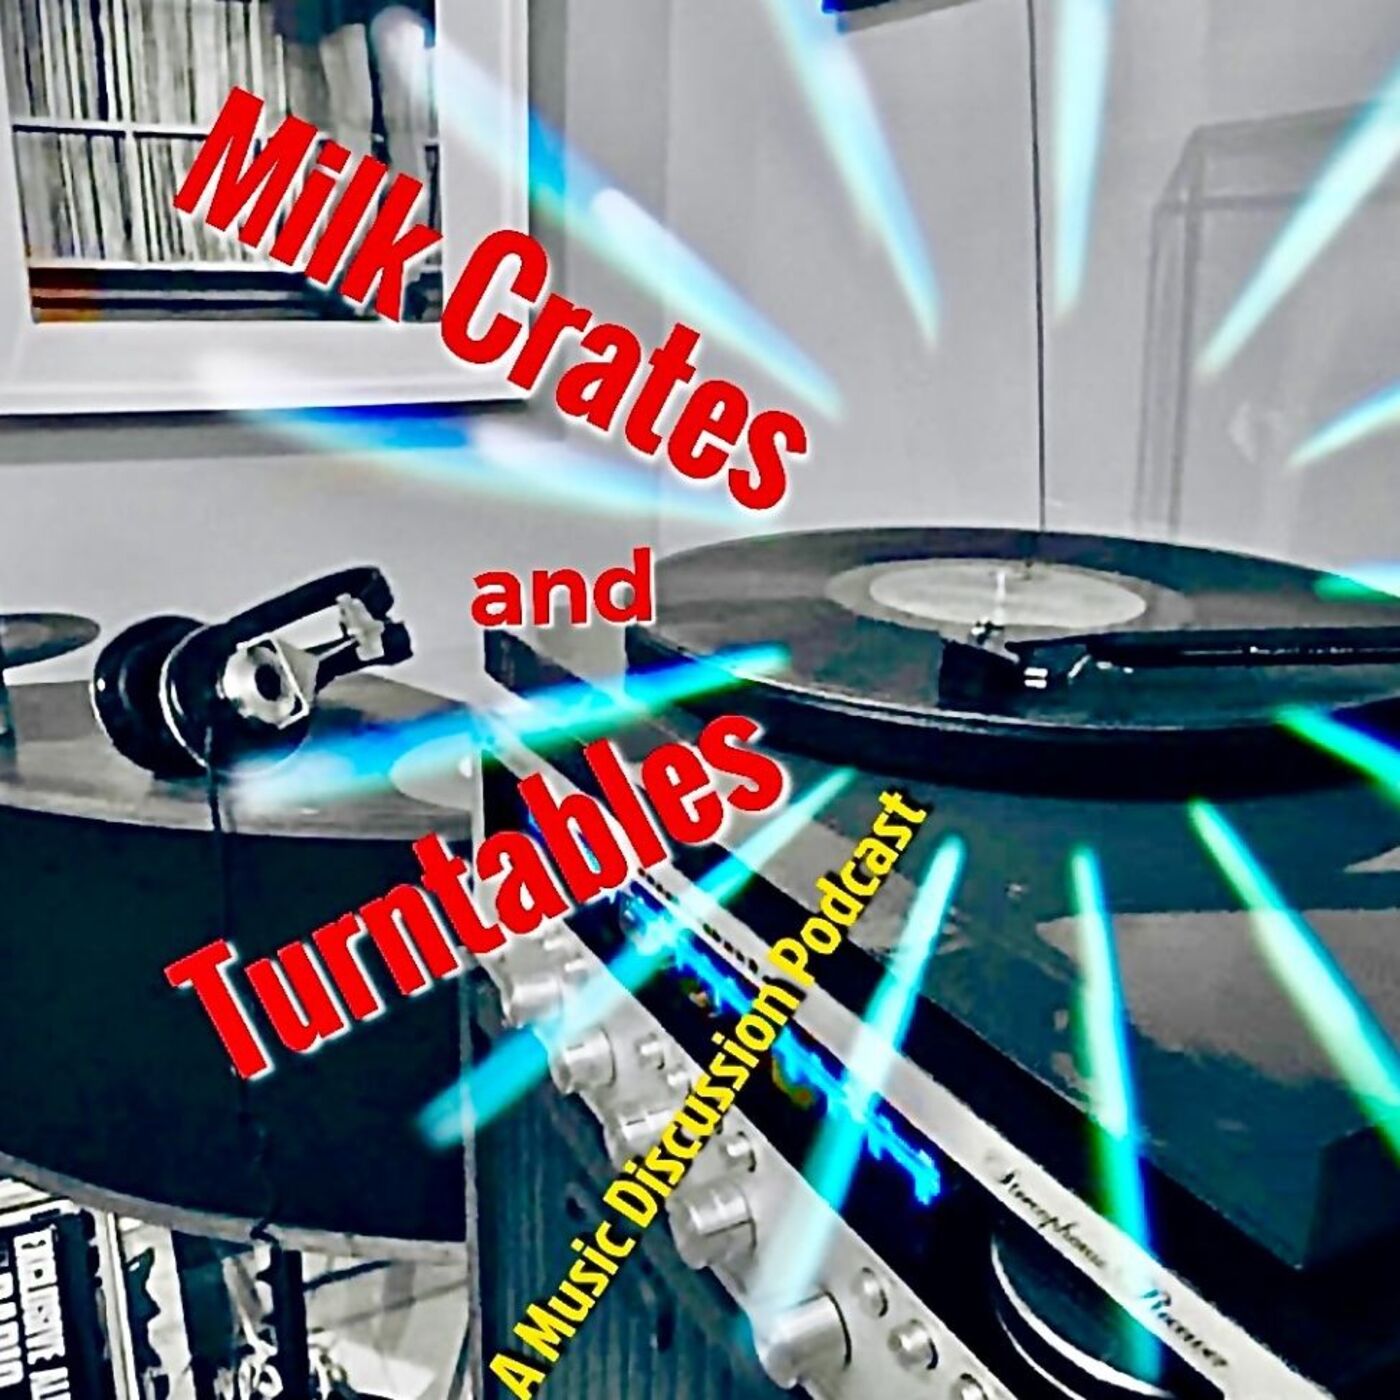 Fresh update on "grammy awards" discussed on Milk Crates and Turntables. A Music Discussion Podcast